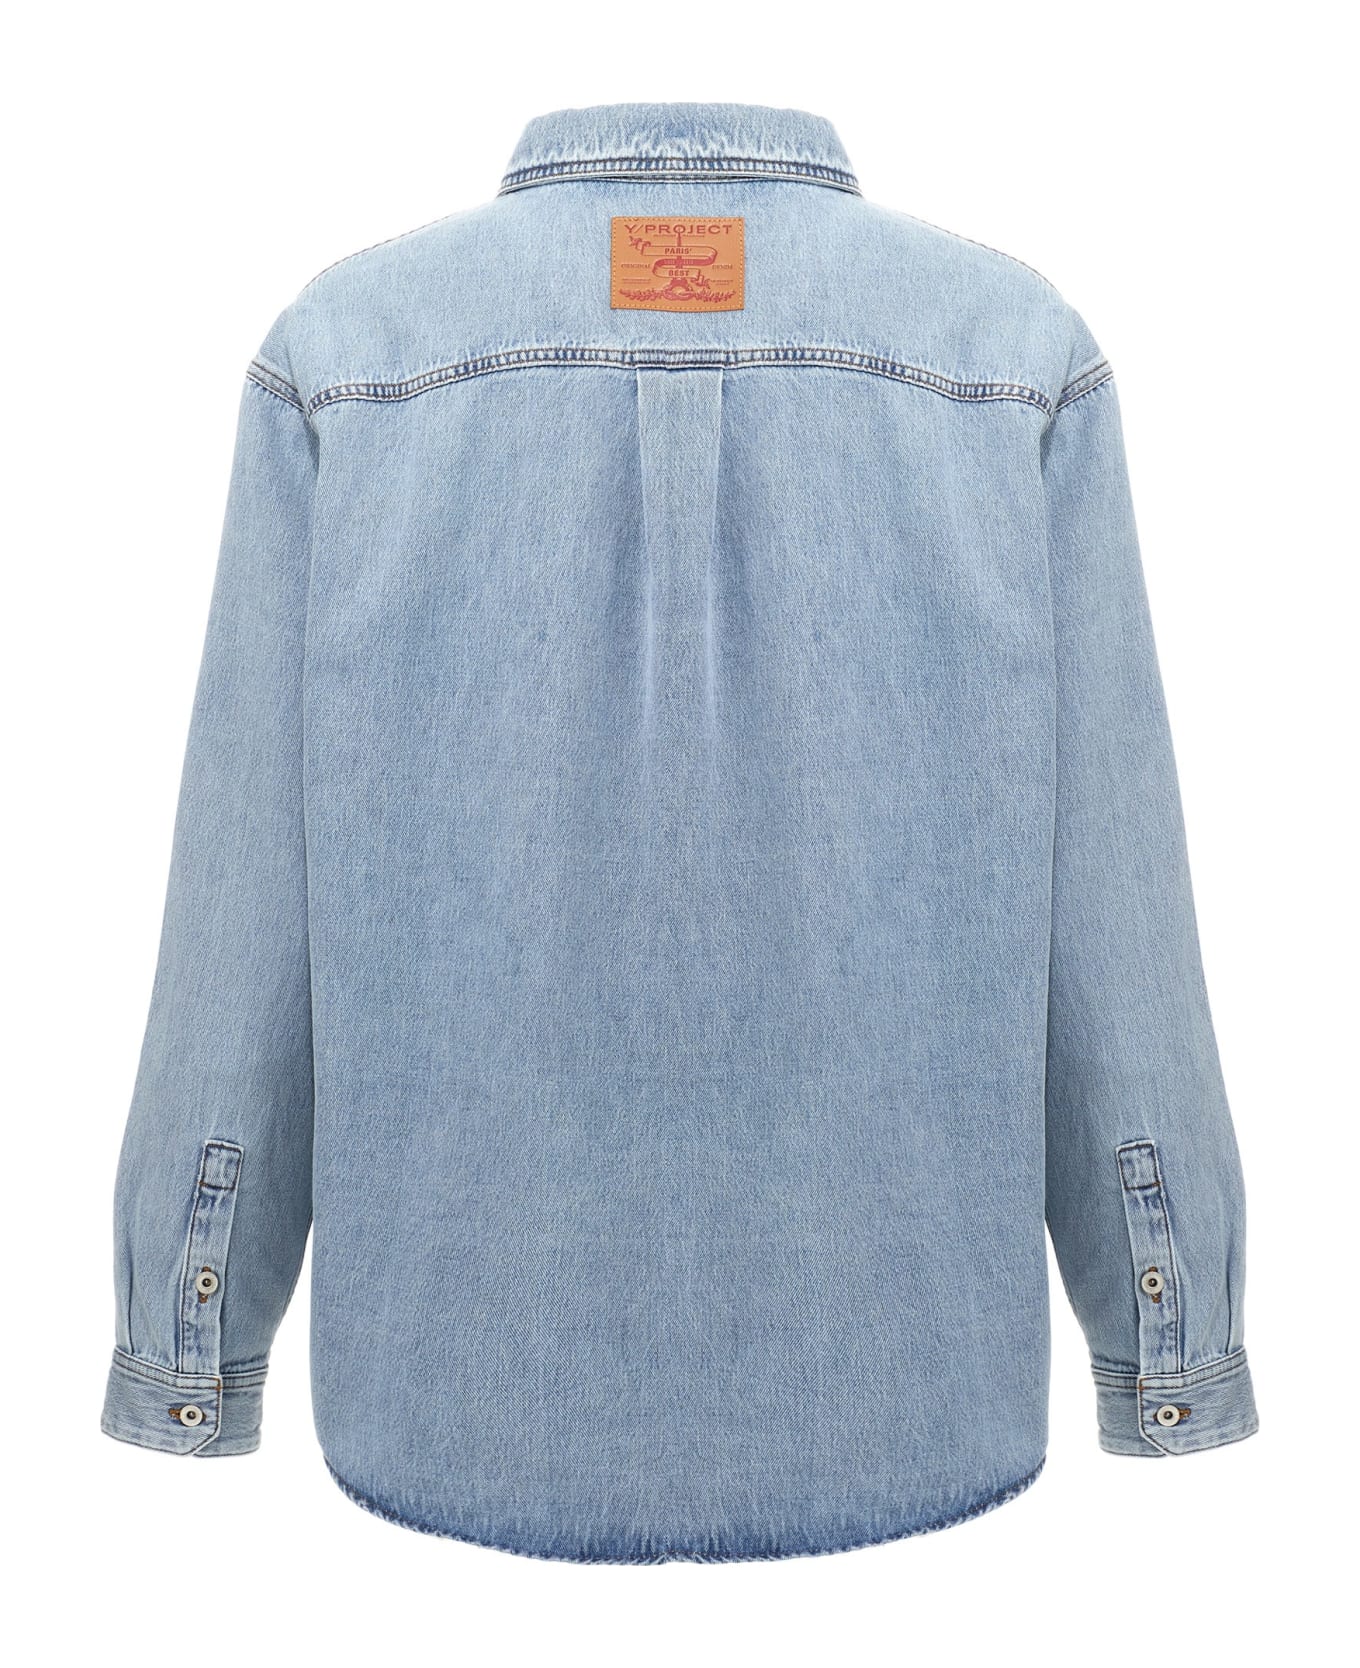 Y/Project 'hook And Eye' Shirt - Light Blue